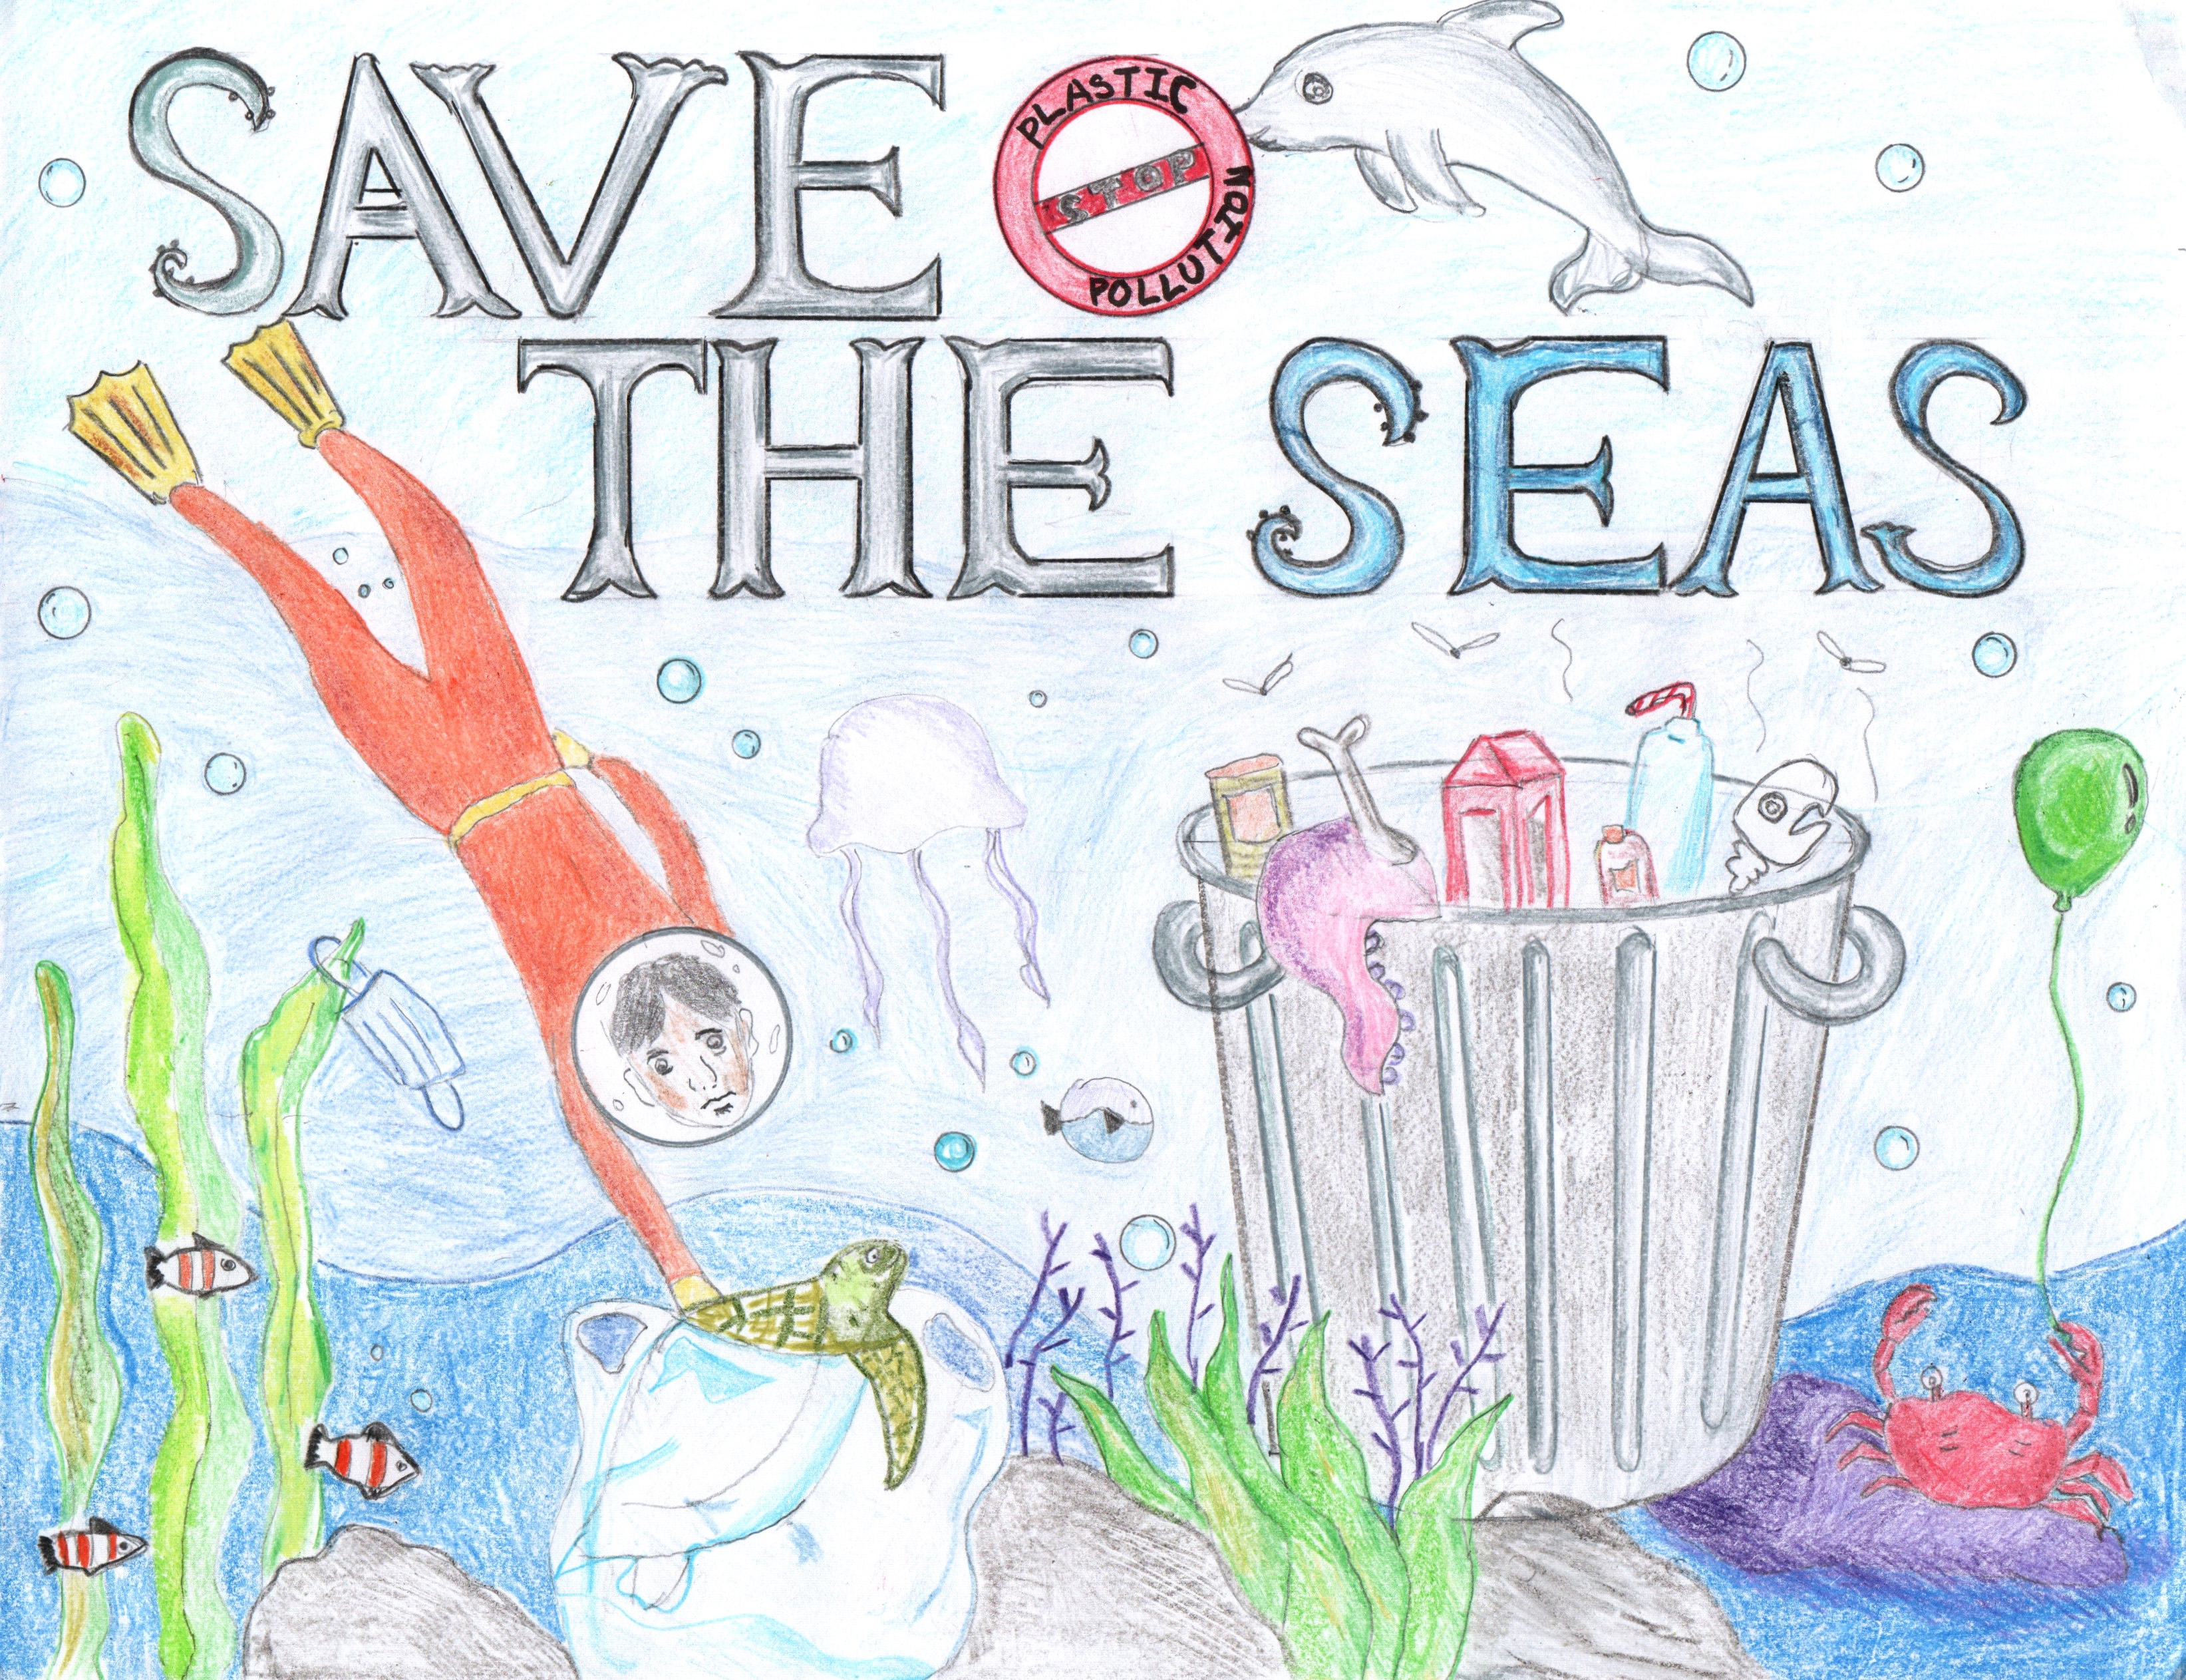 Artwork of a diver cleaning up trash saying "save the seas".